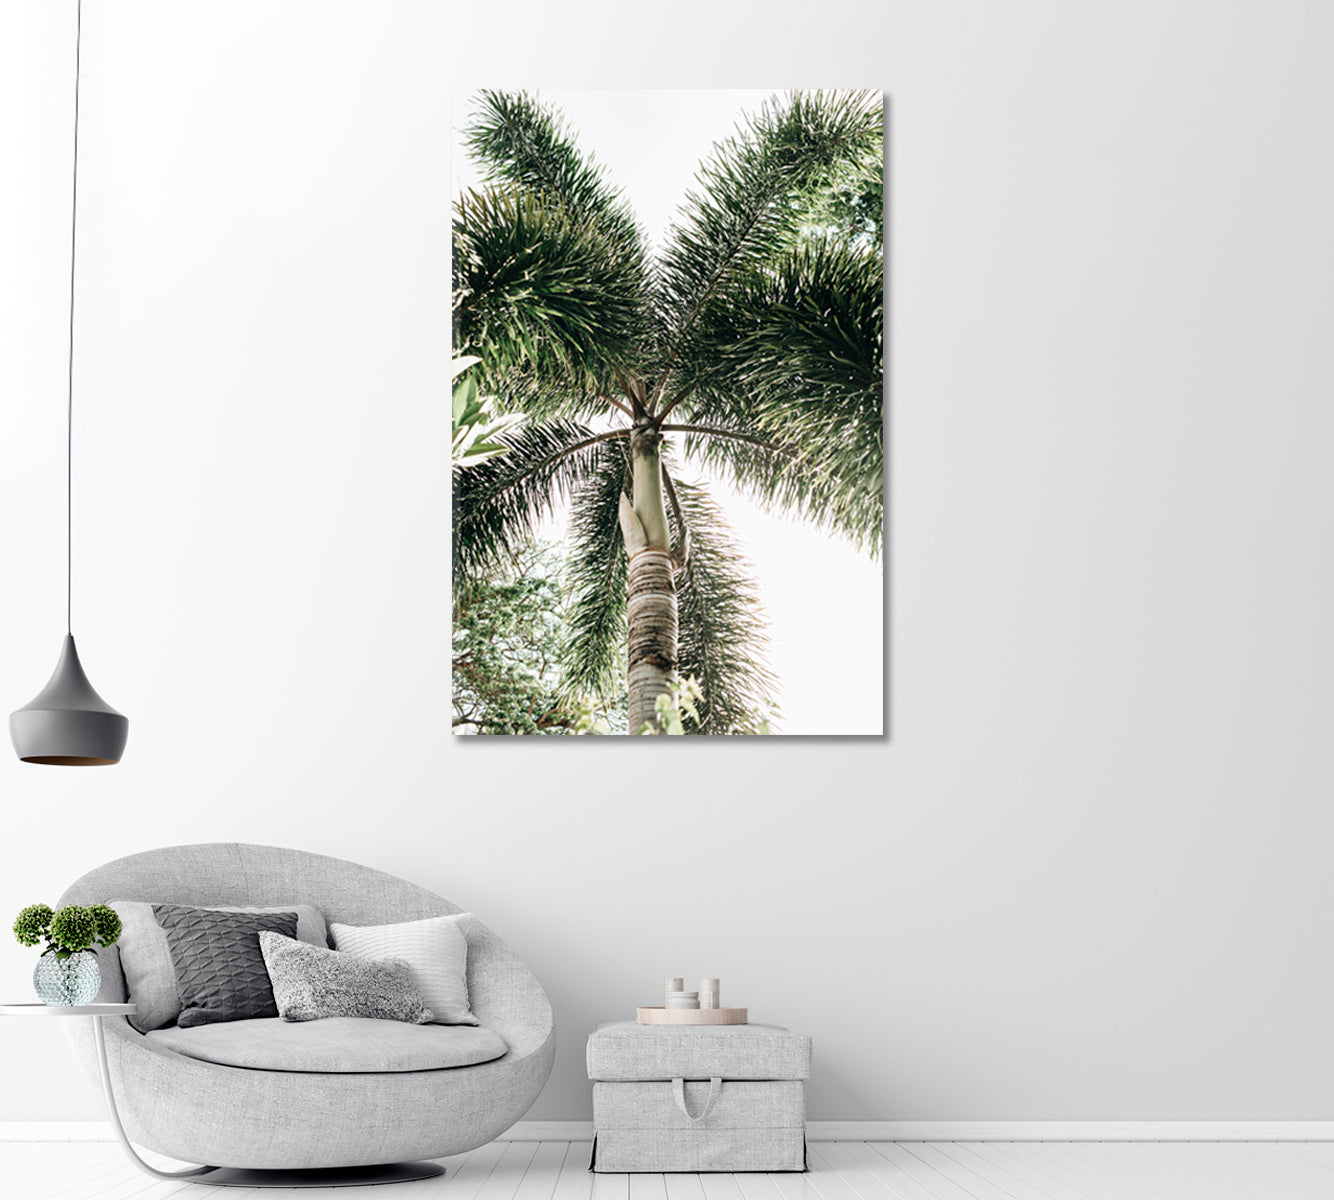 Coconut Palm Tree Art For Home-Canvas Print-CetArt-1 panel-16x24 inches-CetArt